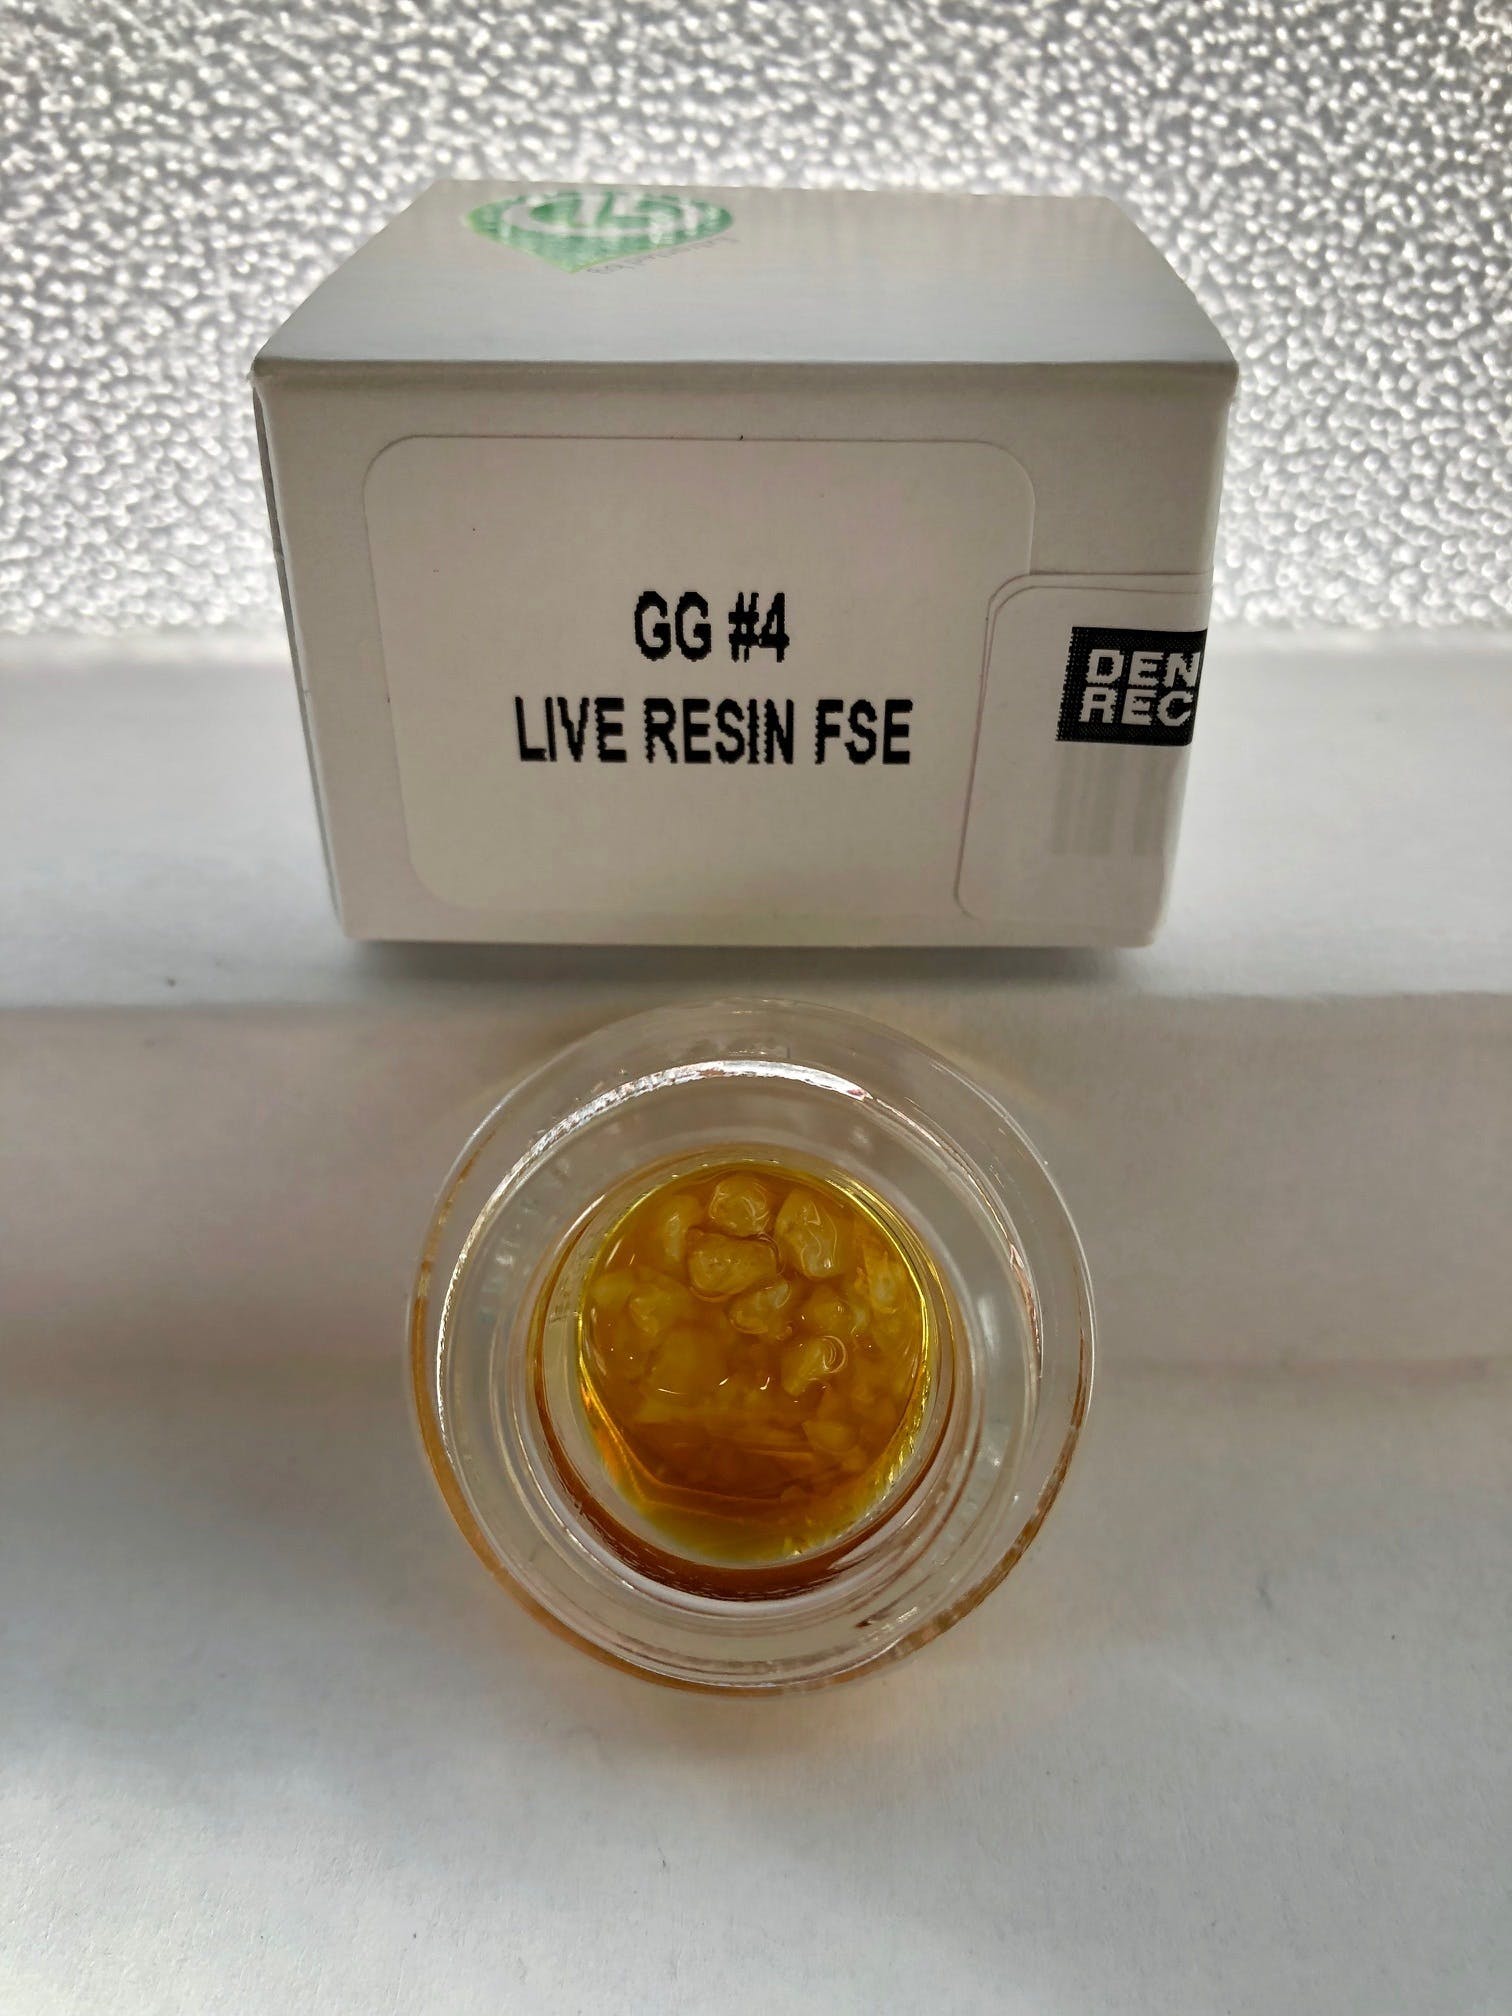 concentrate-green-dot-gg-234-live-resin-fse